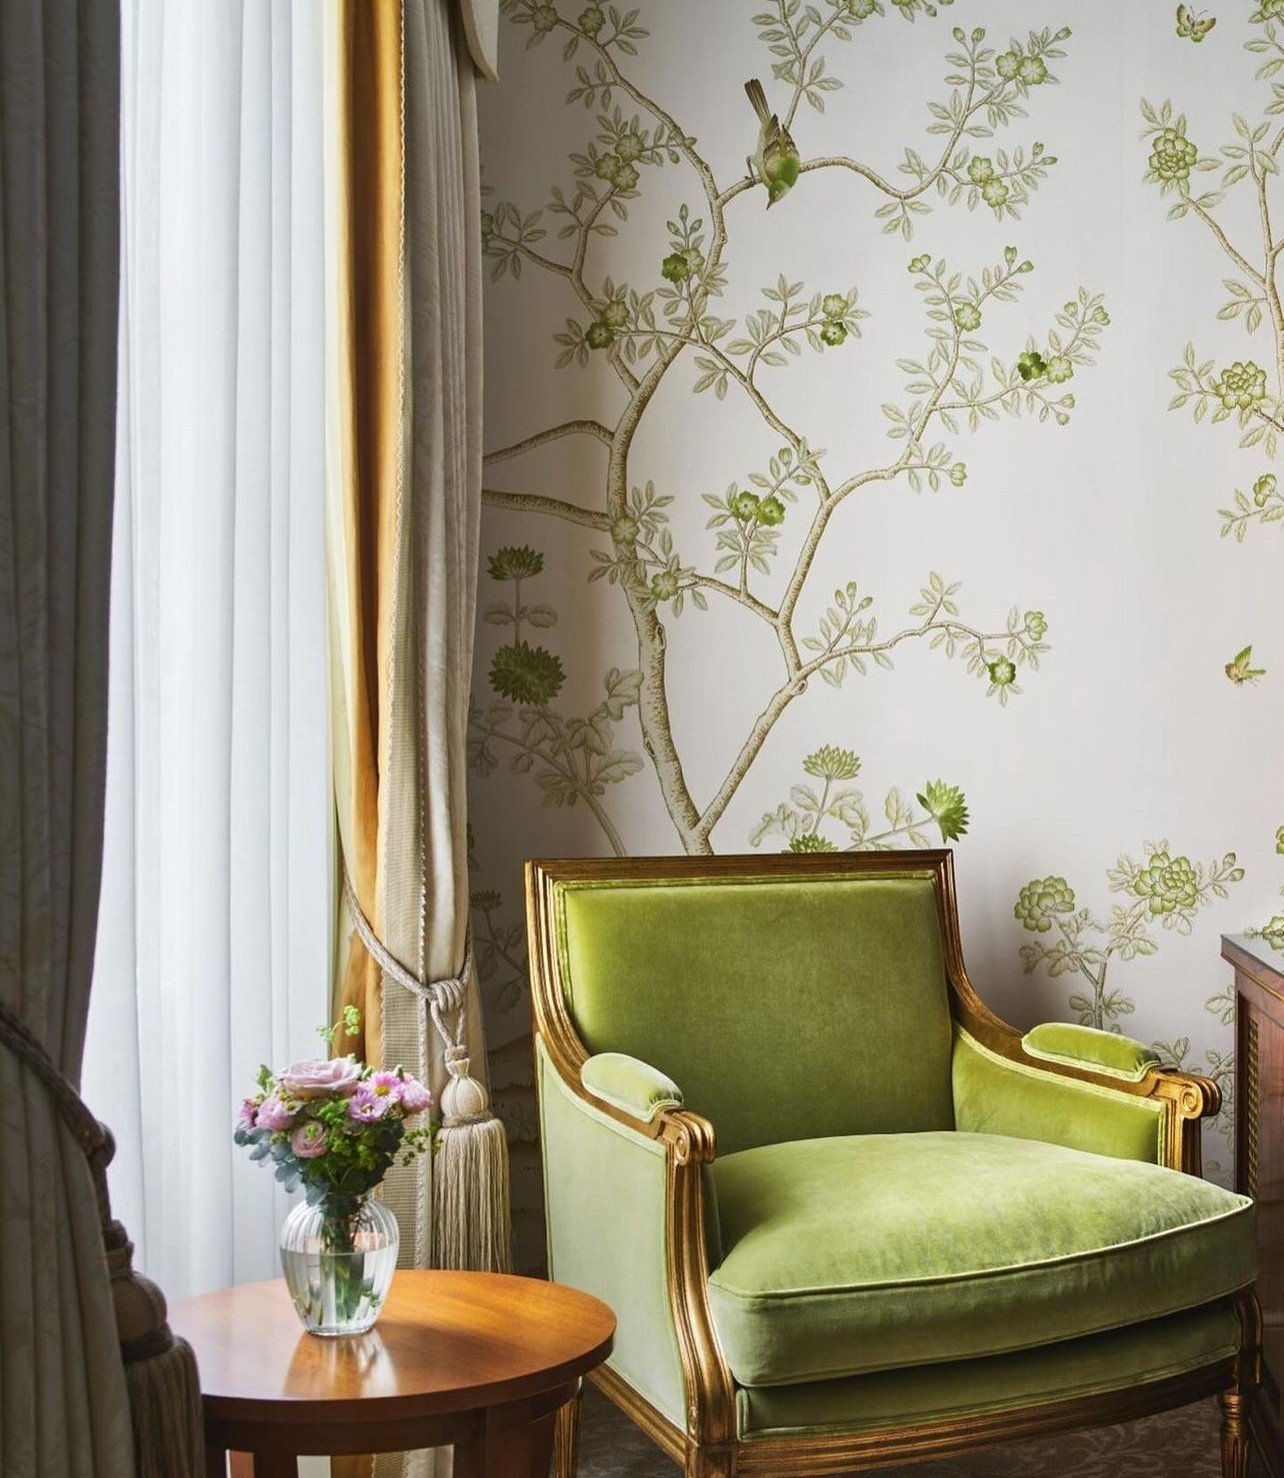 Just in time for summer, @thegoring hotel in London has just finished creating two new garden suites with views over the Goring Gardens. The suite is complete with Italian marble bathrooms, silk walls, a spacious living room, and charming design deta